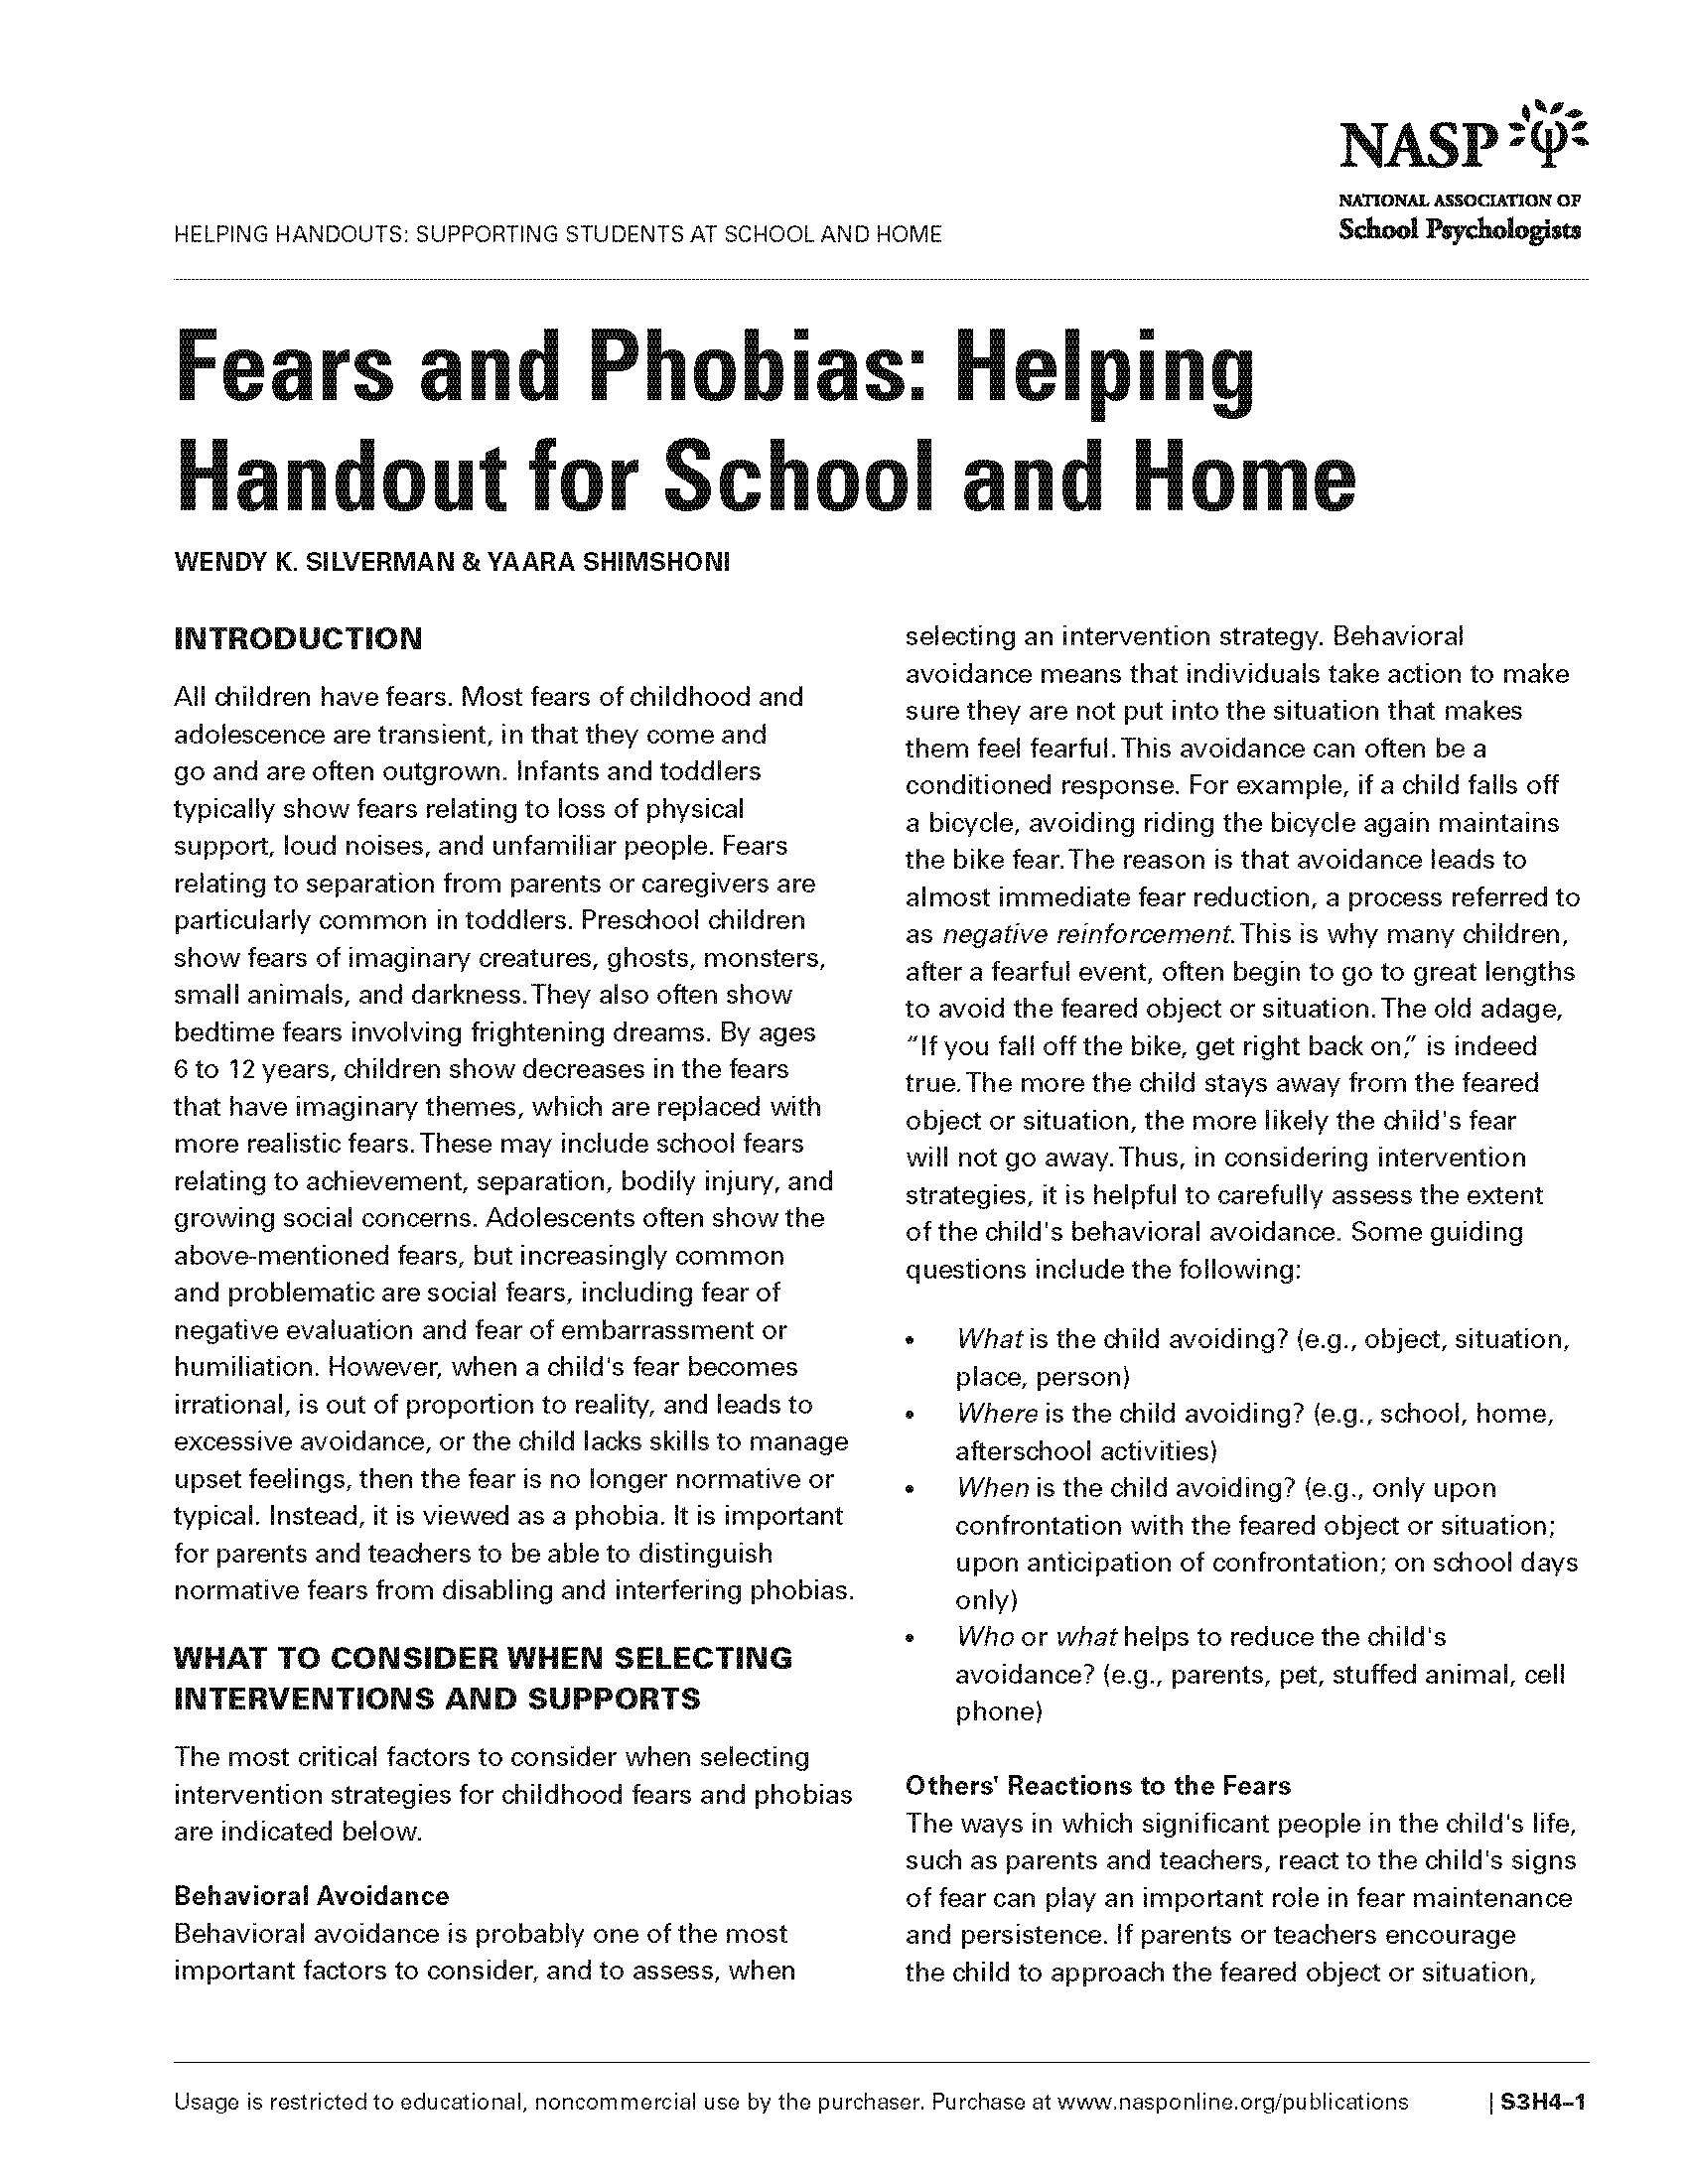 Fears & Phobias: Helping Handout for School and Home 